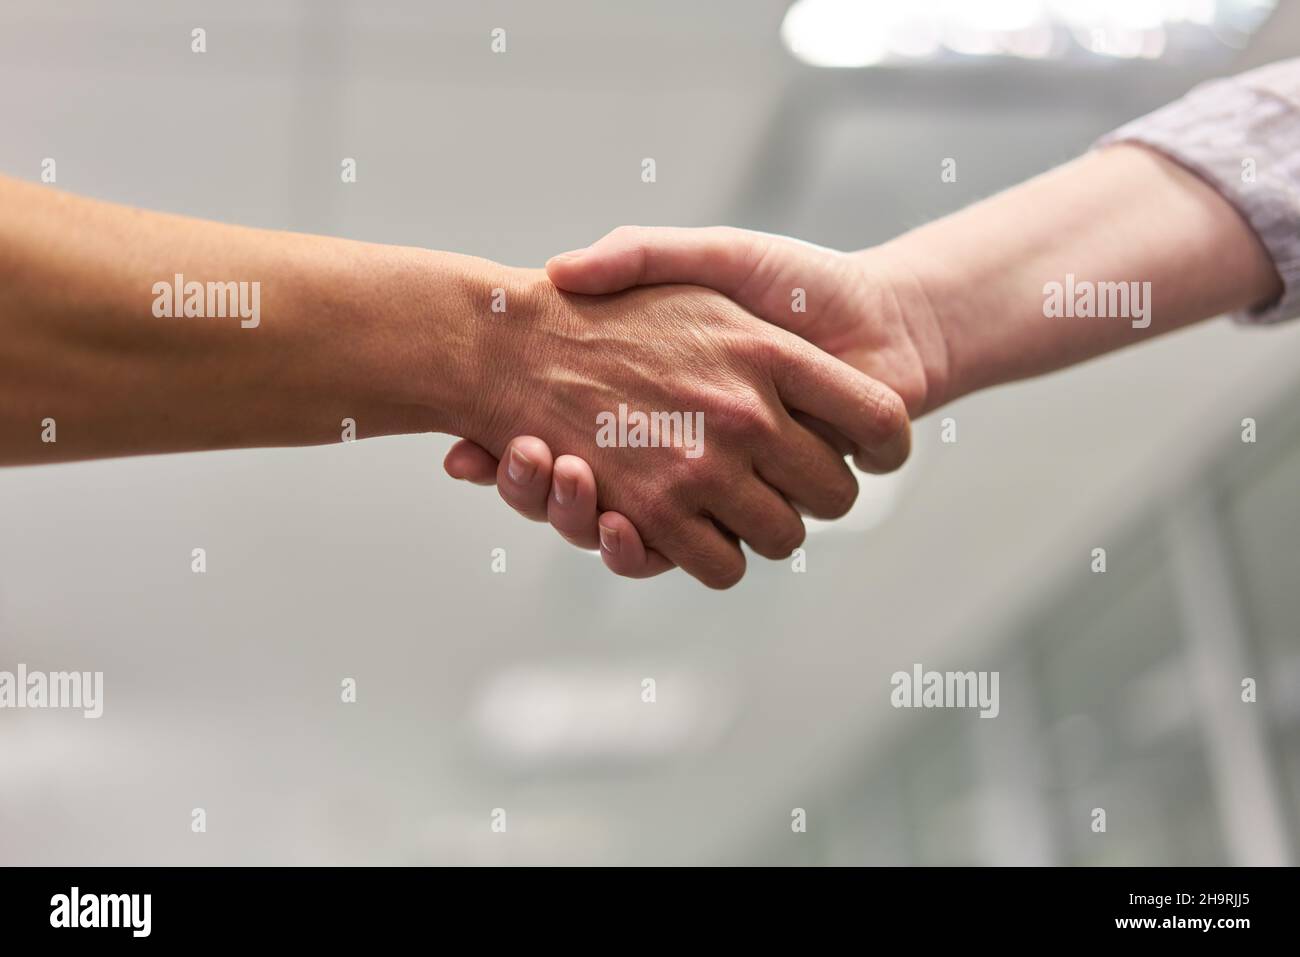 Business people shaking hands as a symbol of cooperation and agreement Stock Photo